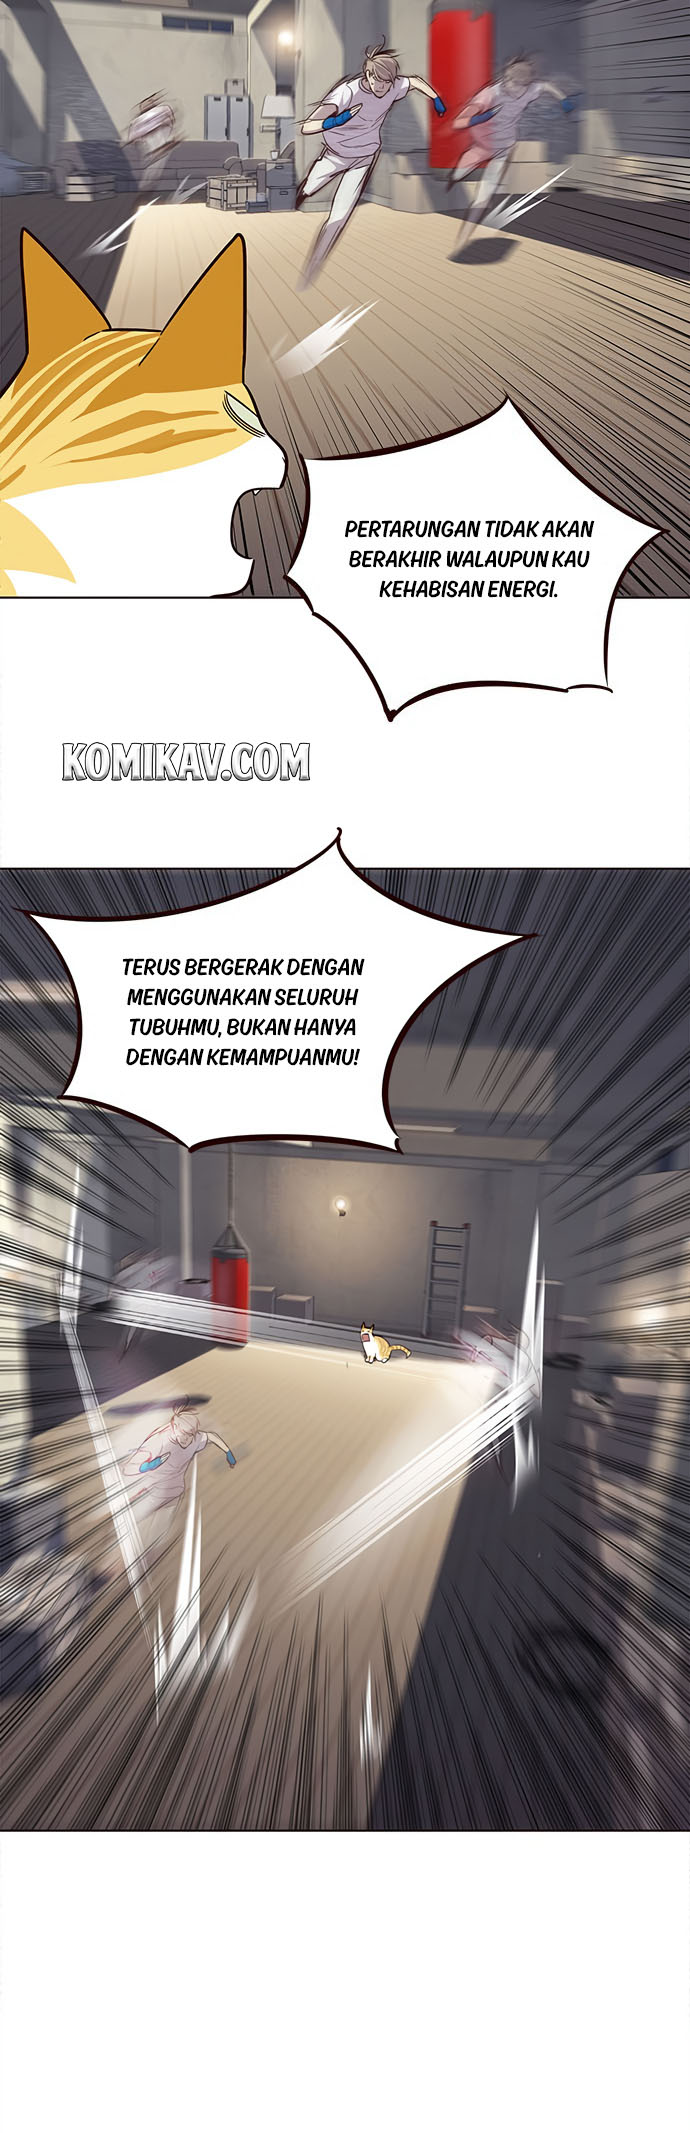 Eleceed Chapter 21